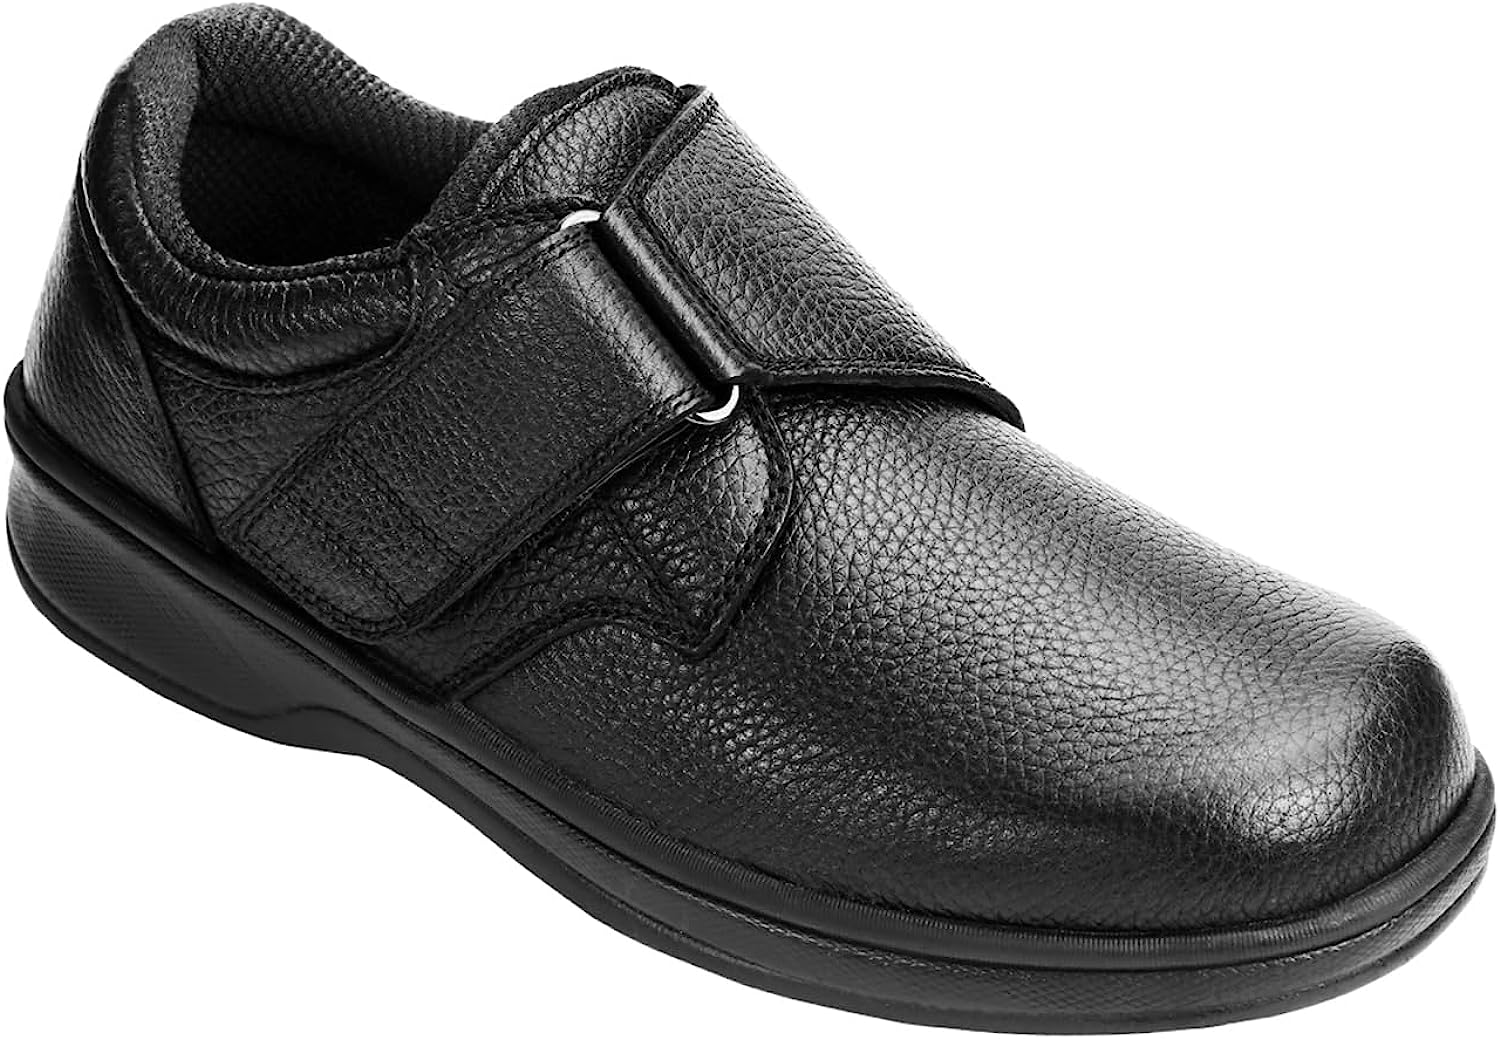 Orthofeet Innovative Diabetic Shoes for Men - Proven [...]